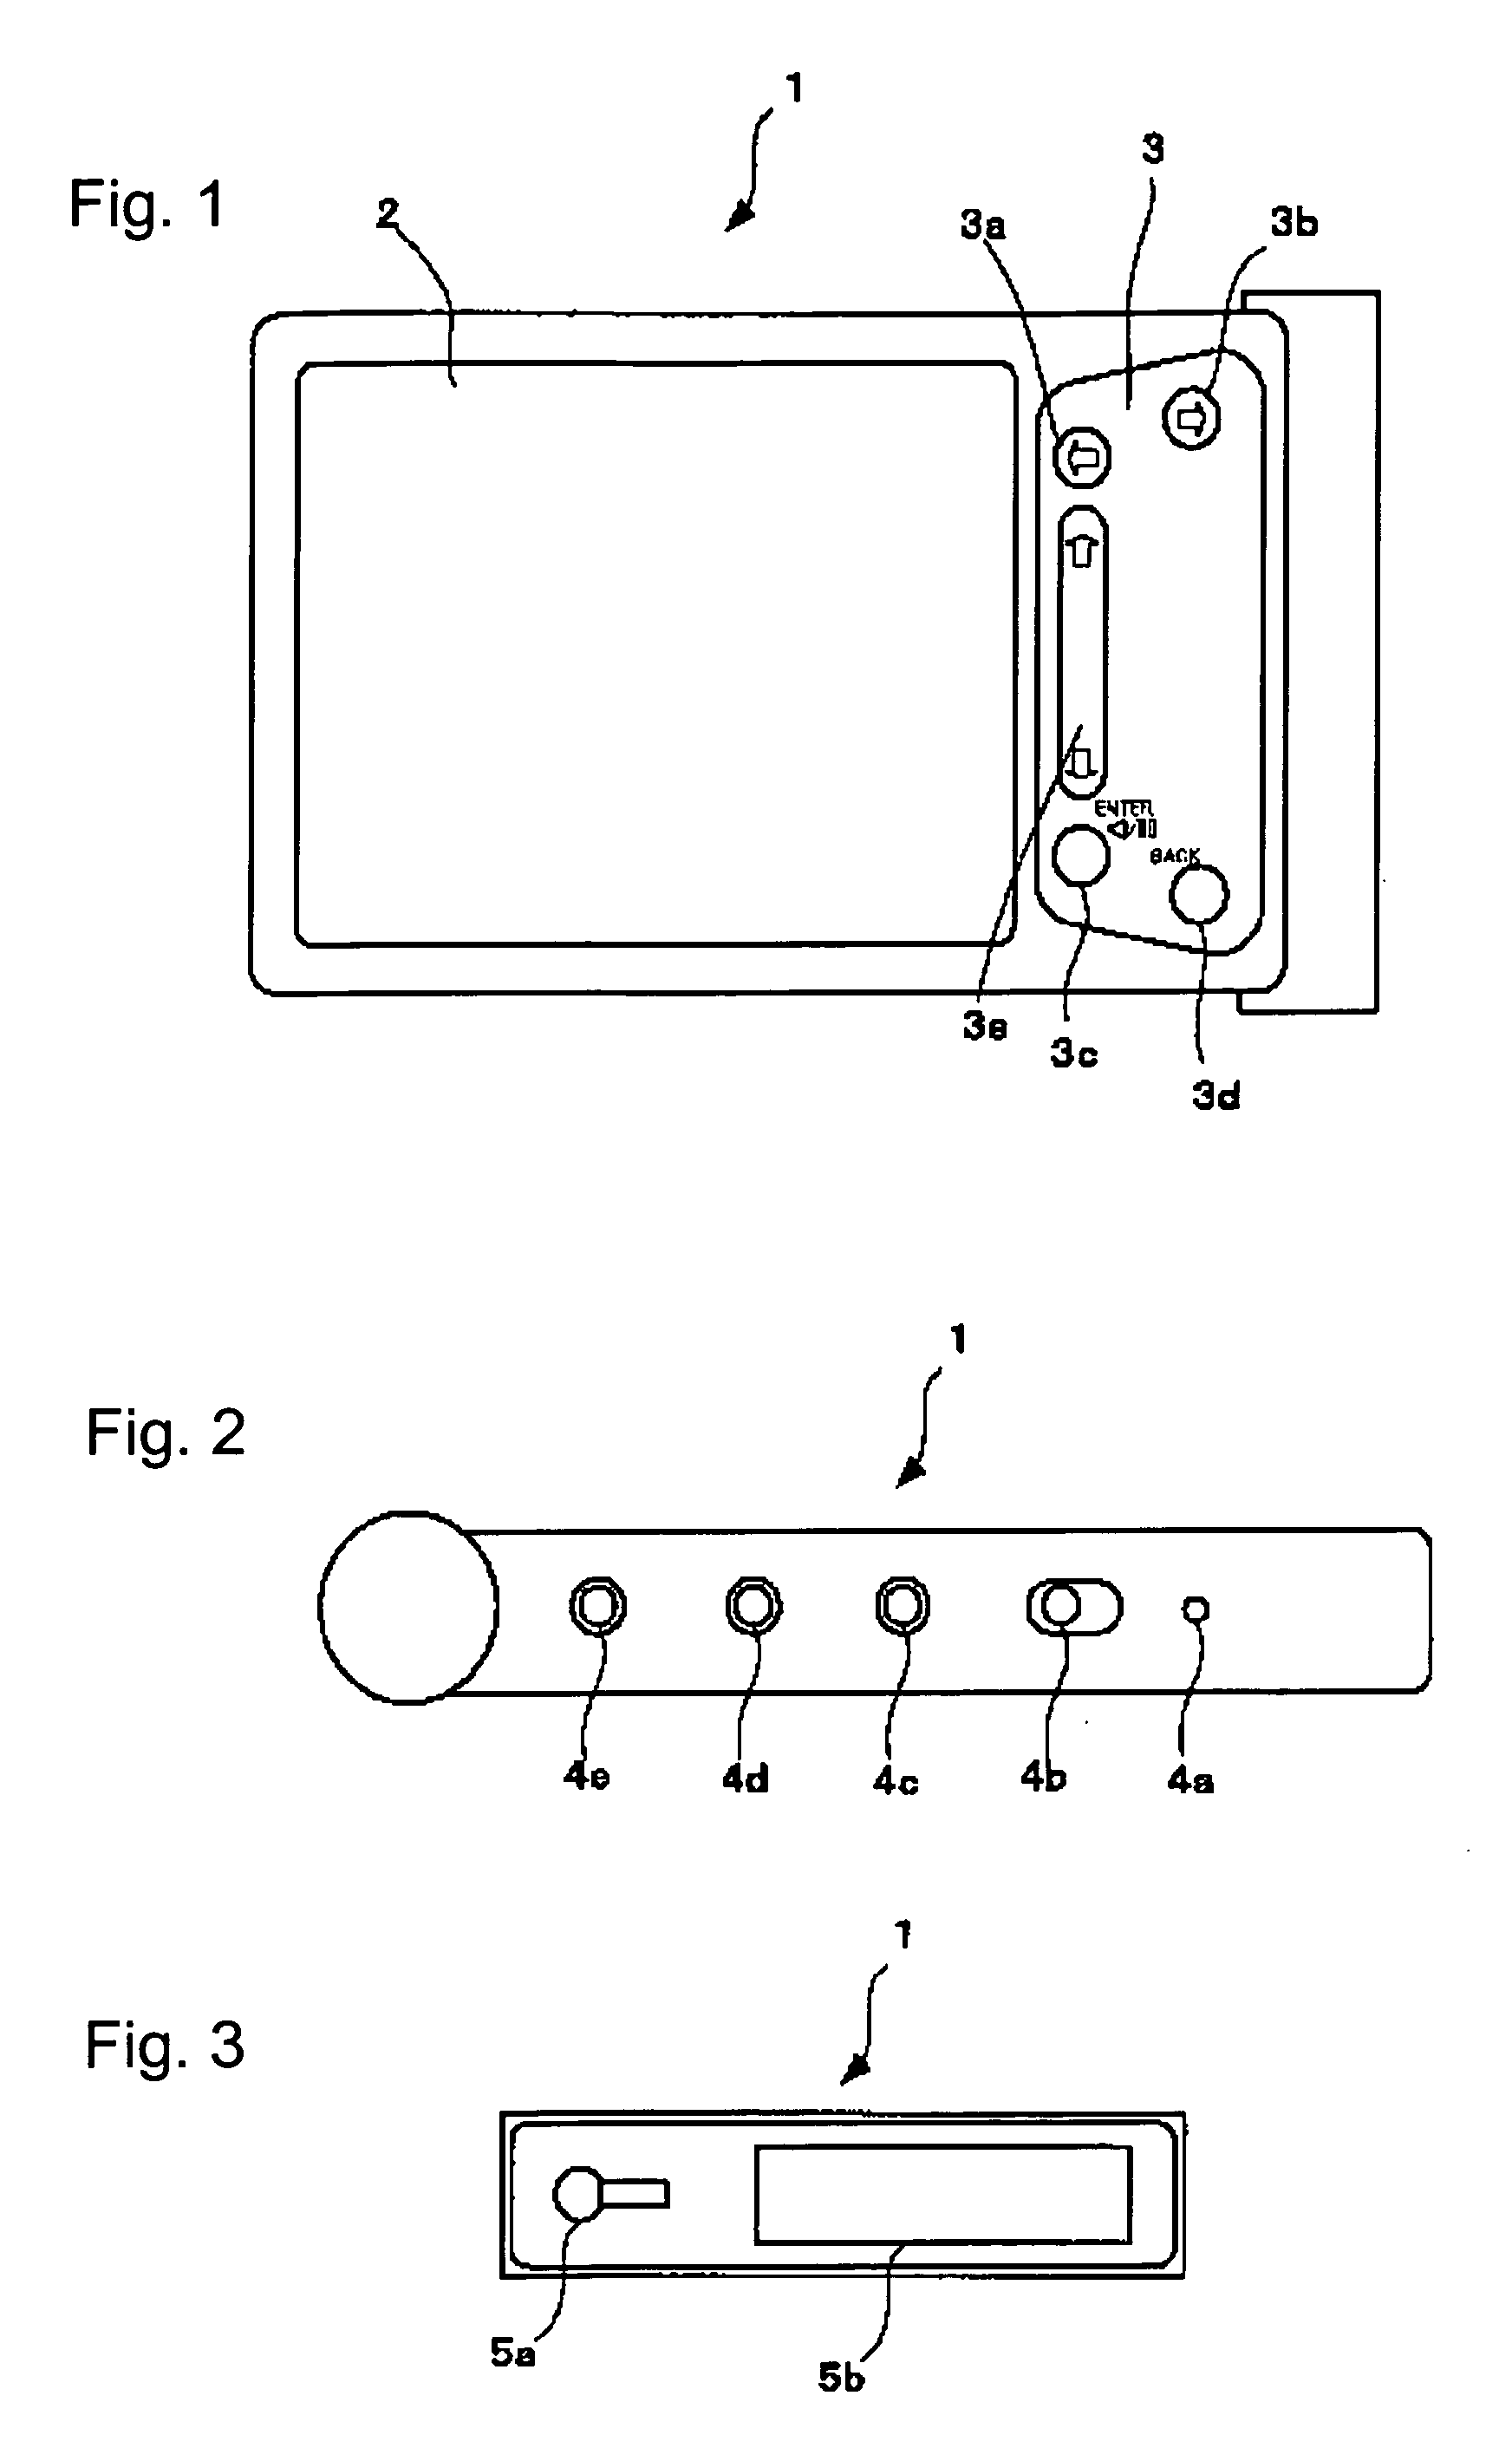 Hard disk multimedia player and method